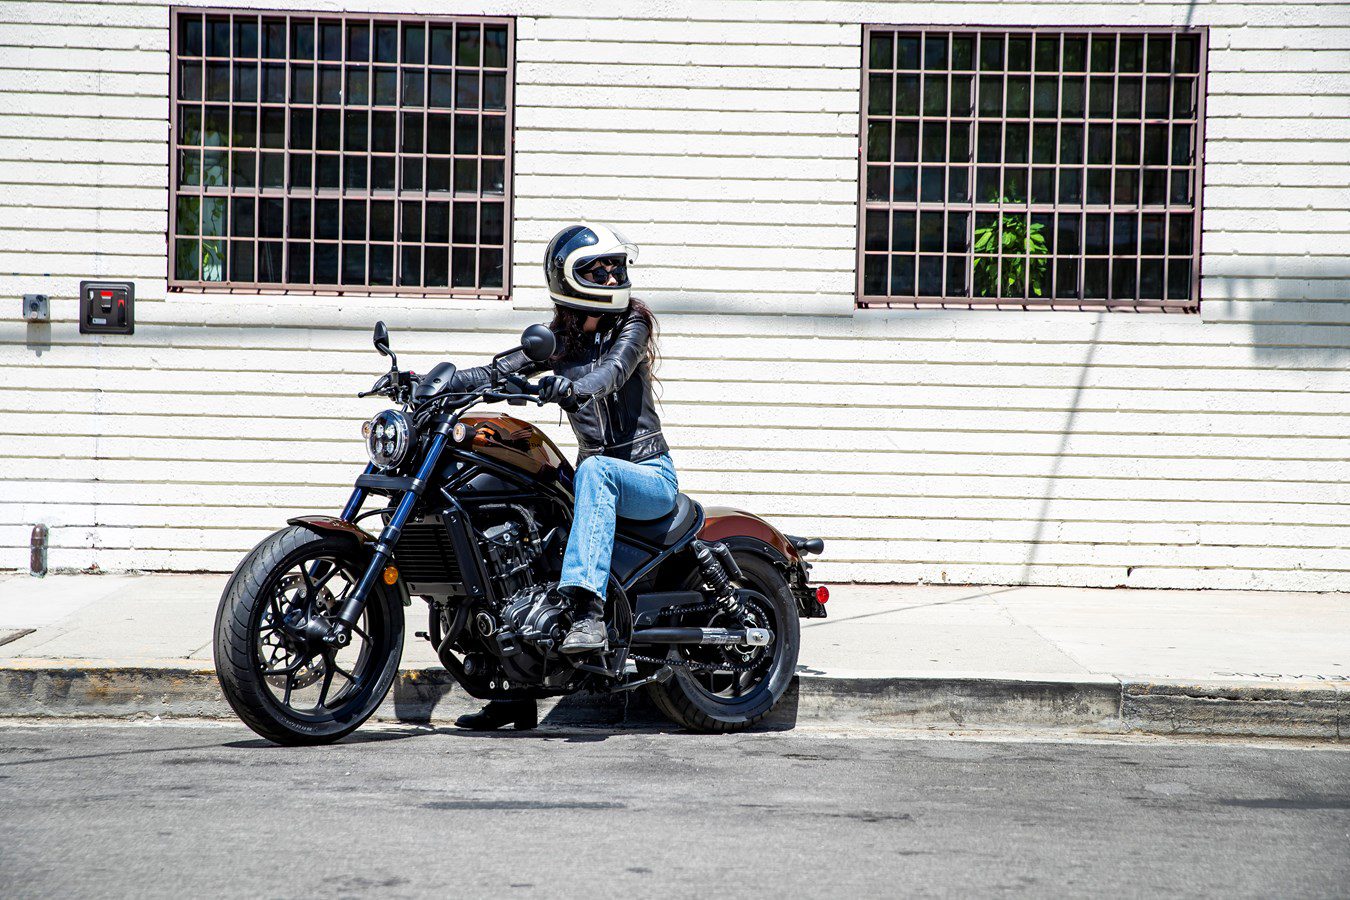 A lady riding down the street on a Honda Rebel 500